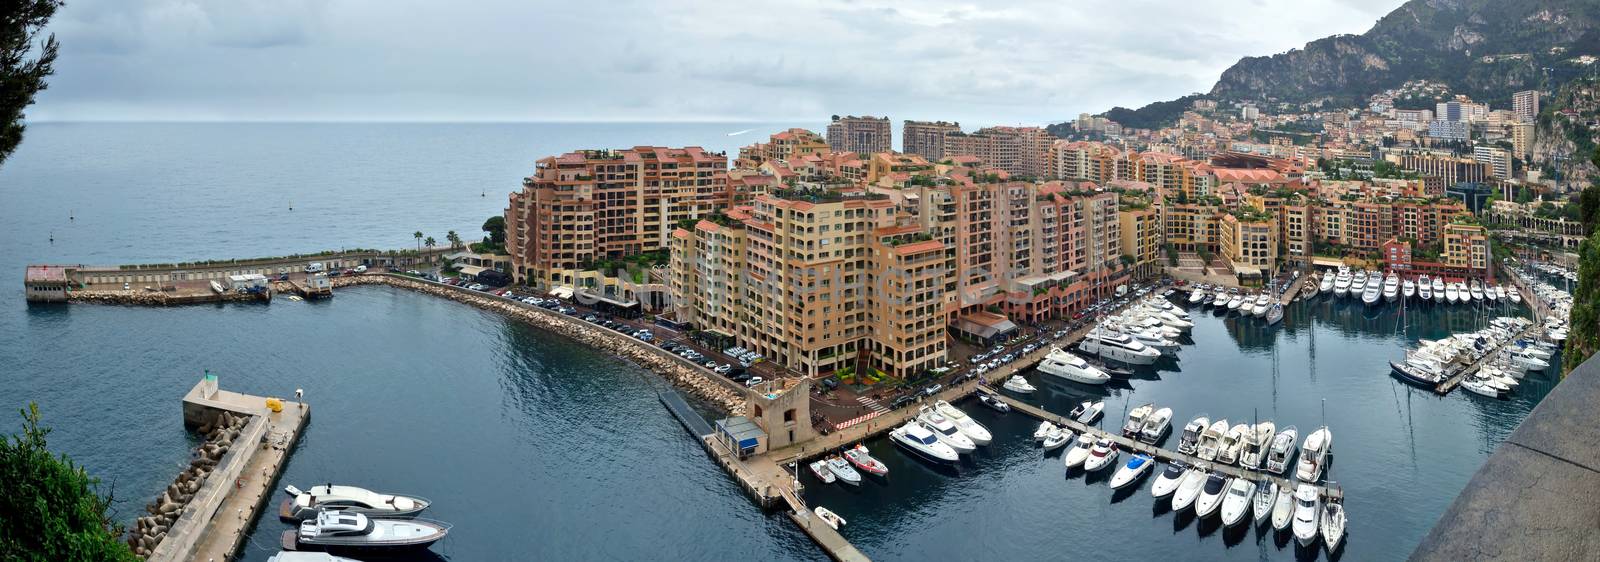 Architecture of Fontvieille district.  Monaco, Monte Carlo. Lands for the district have been reclaimed from the sea.